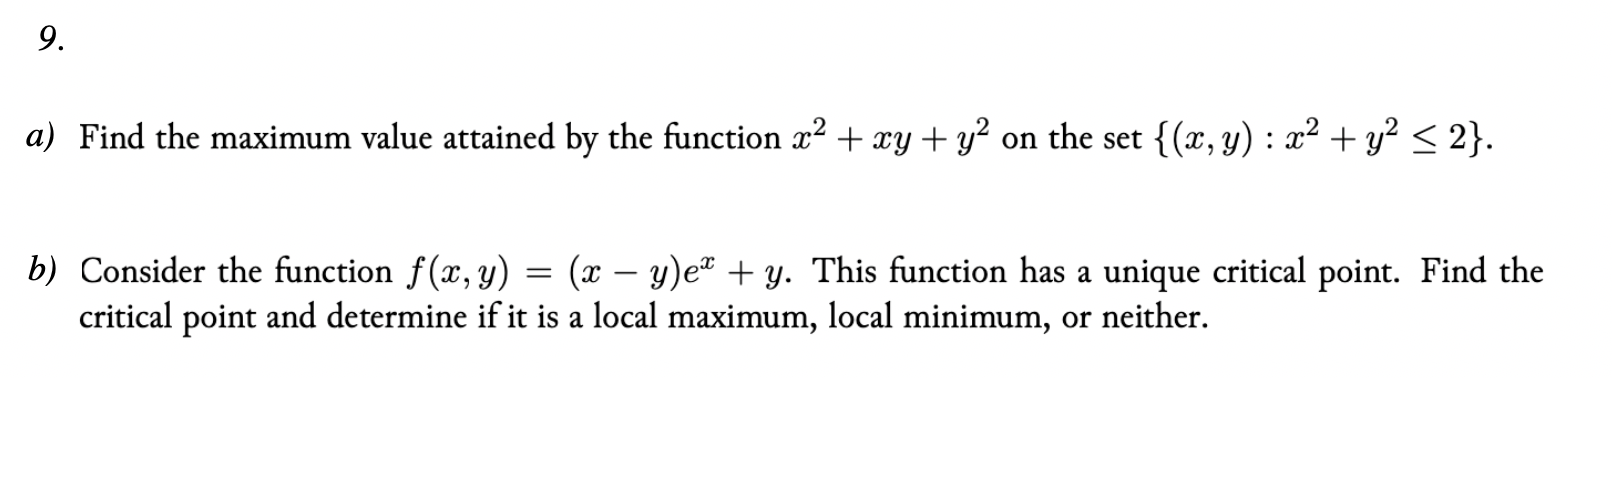 Find the maximum value attained by the function x² + xy + y² on the set {(x, y) : x² + y² < 2}.
